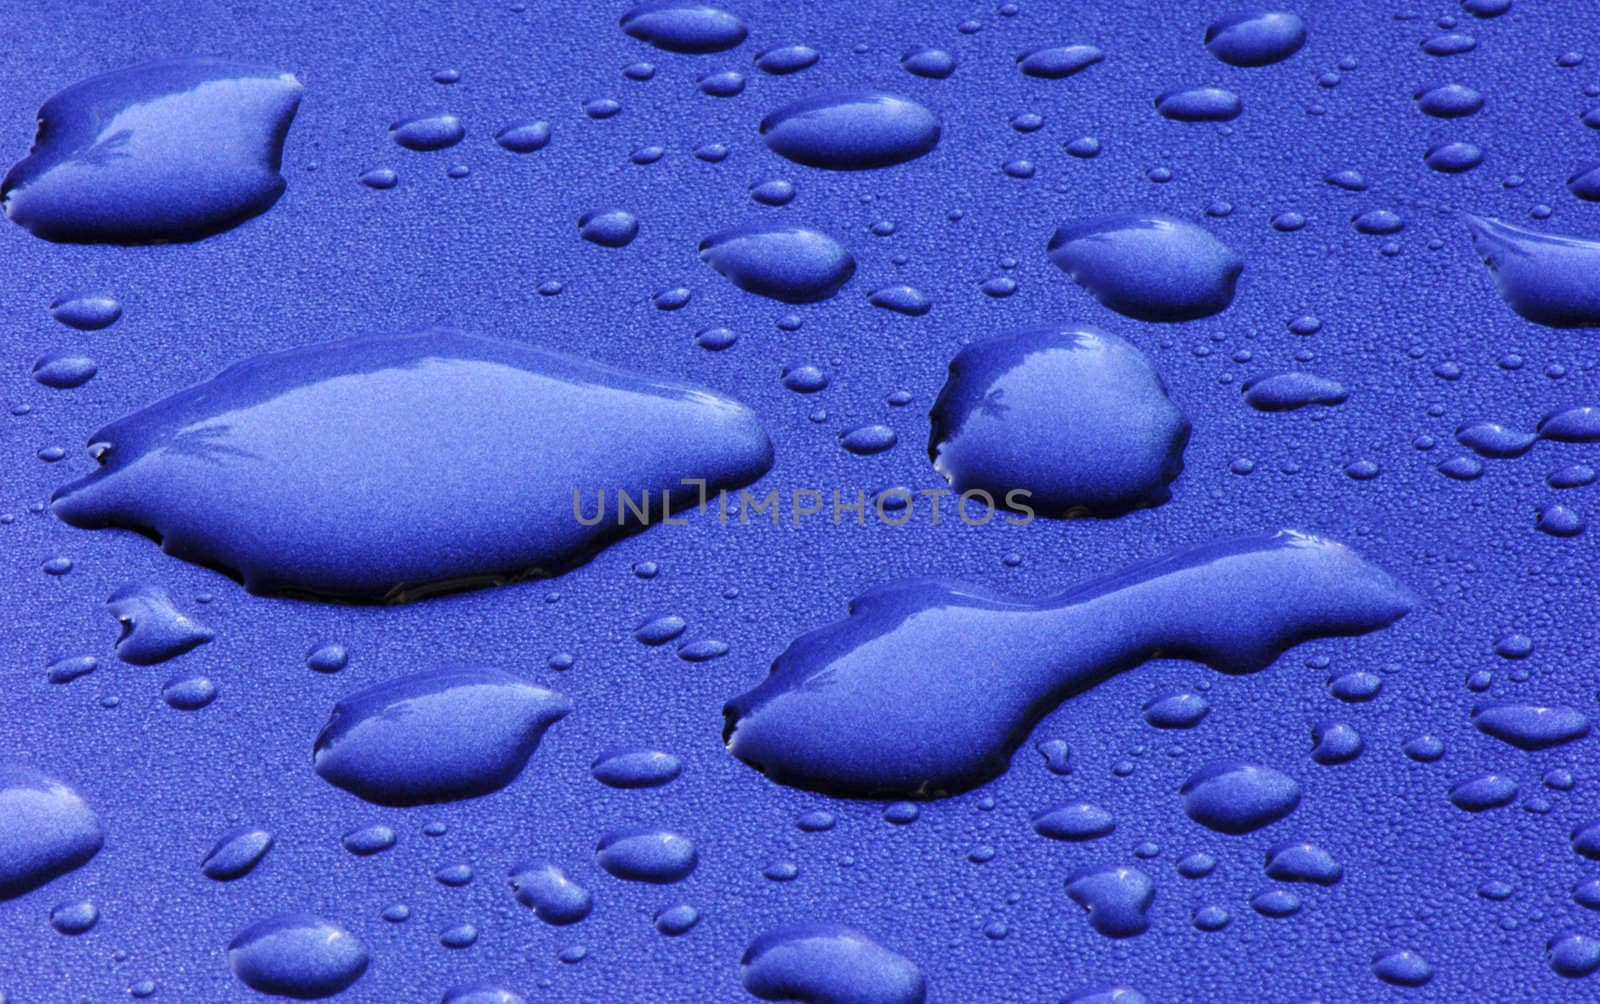 Image shows droplets on a metallic surface, following a rainstorm